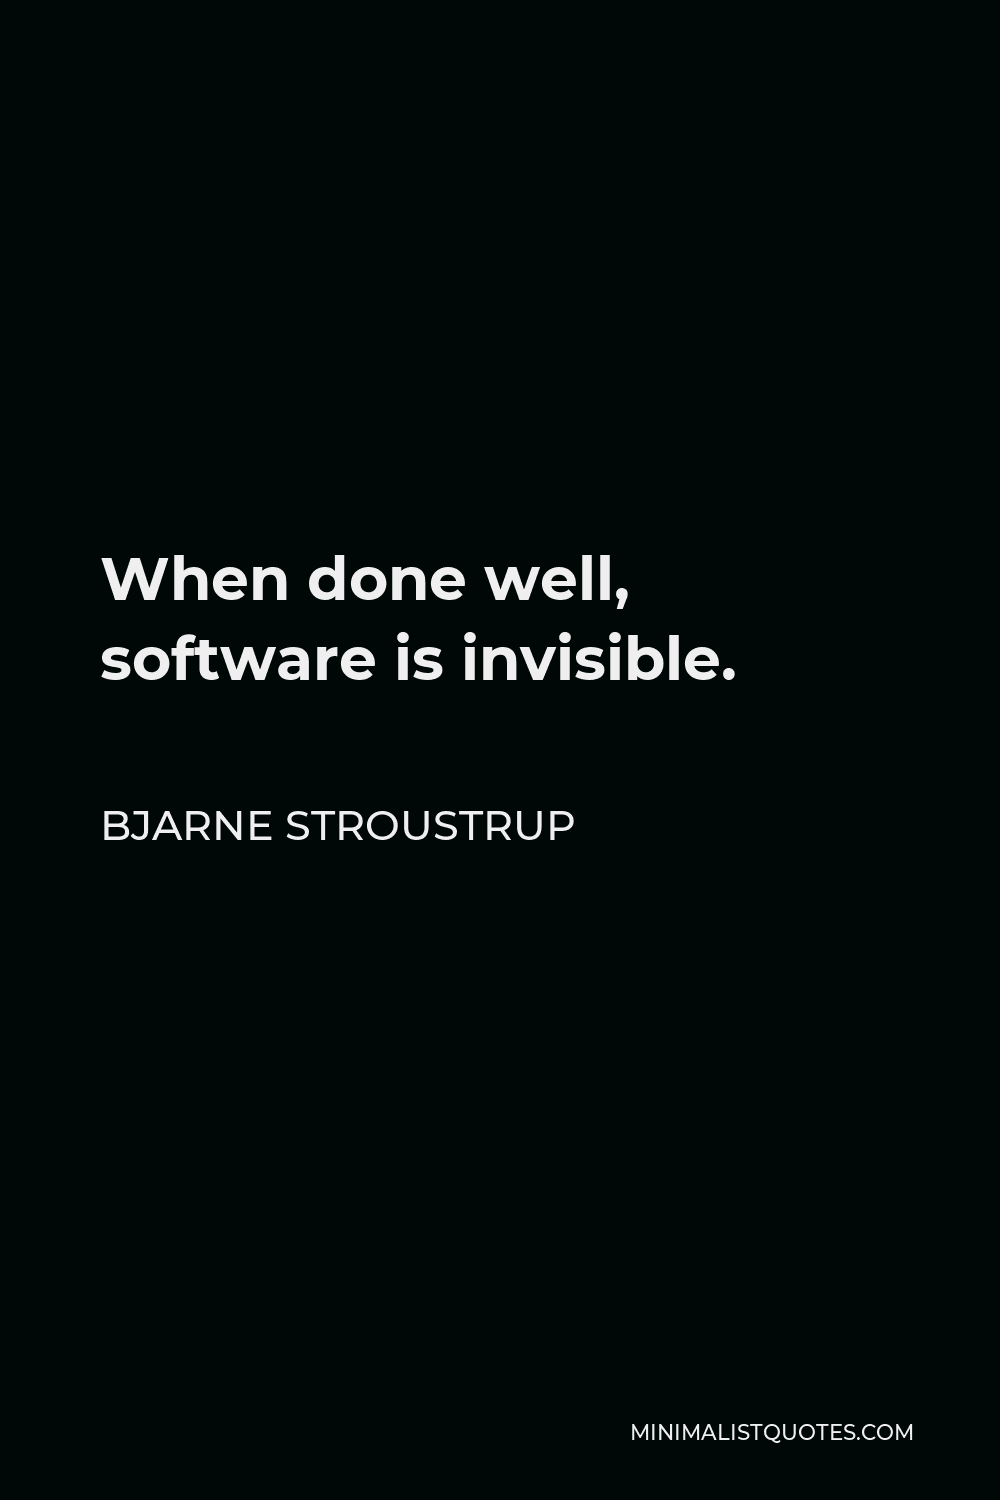 Bjarne Stroustrup Quote - When done well, software is invisible.